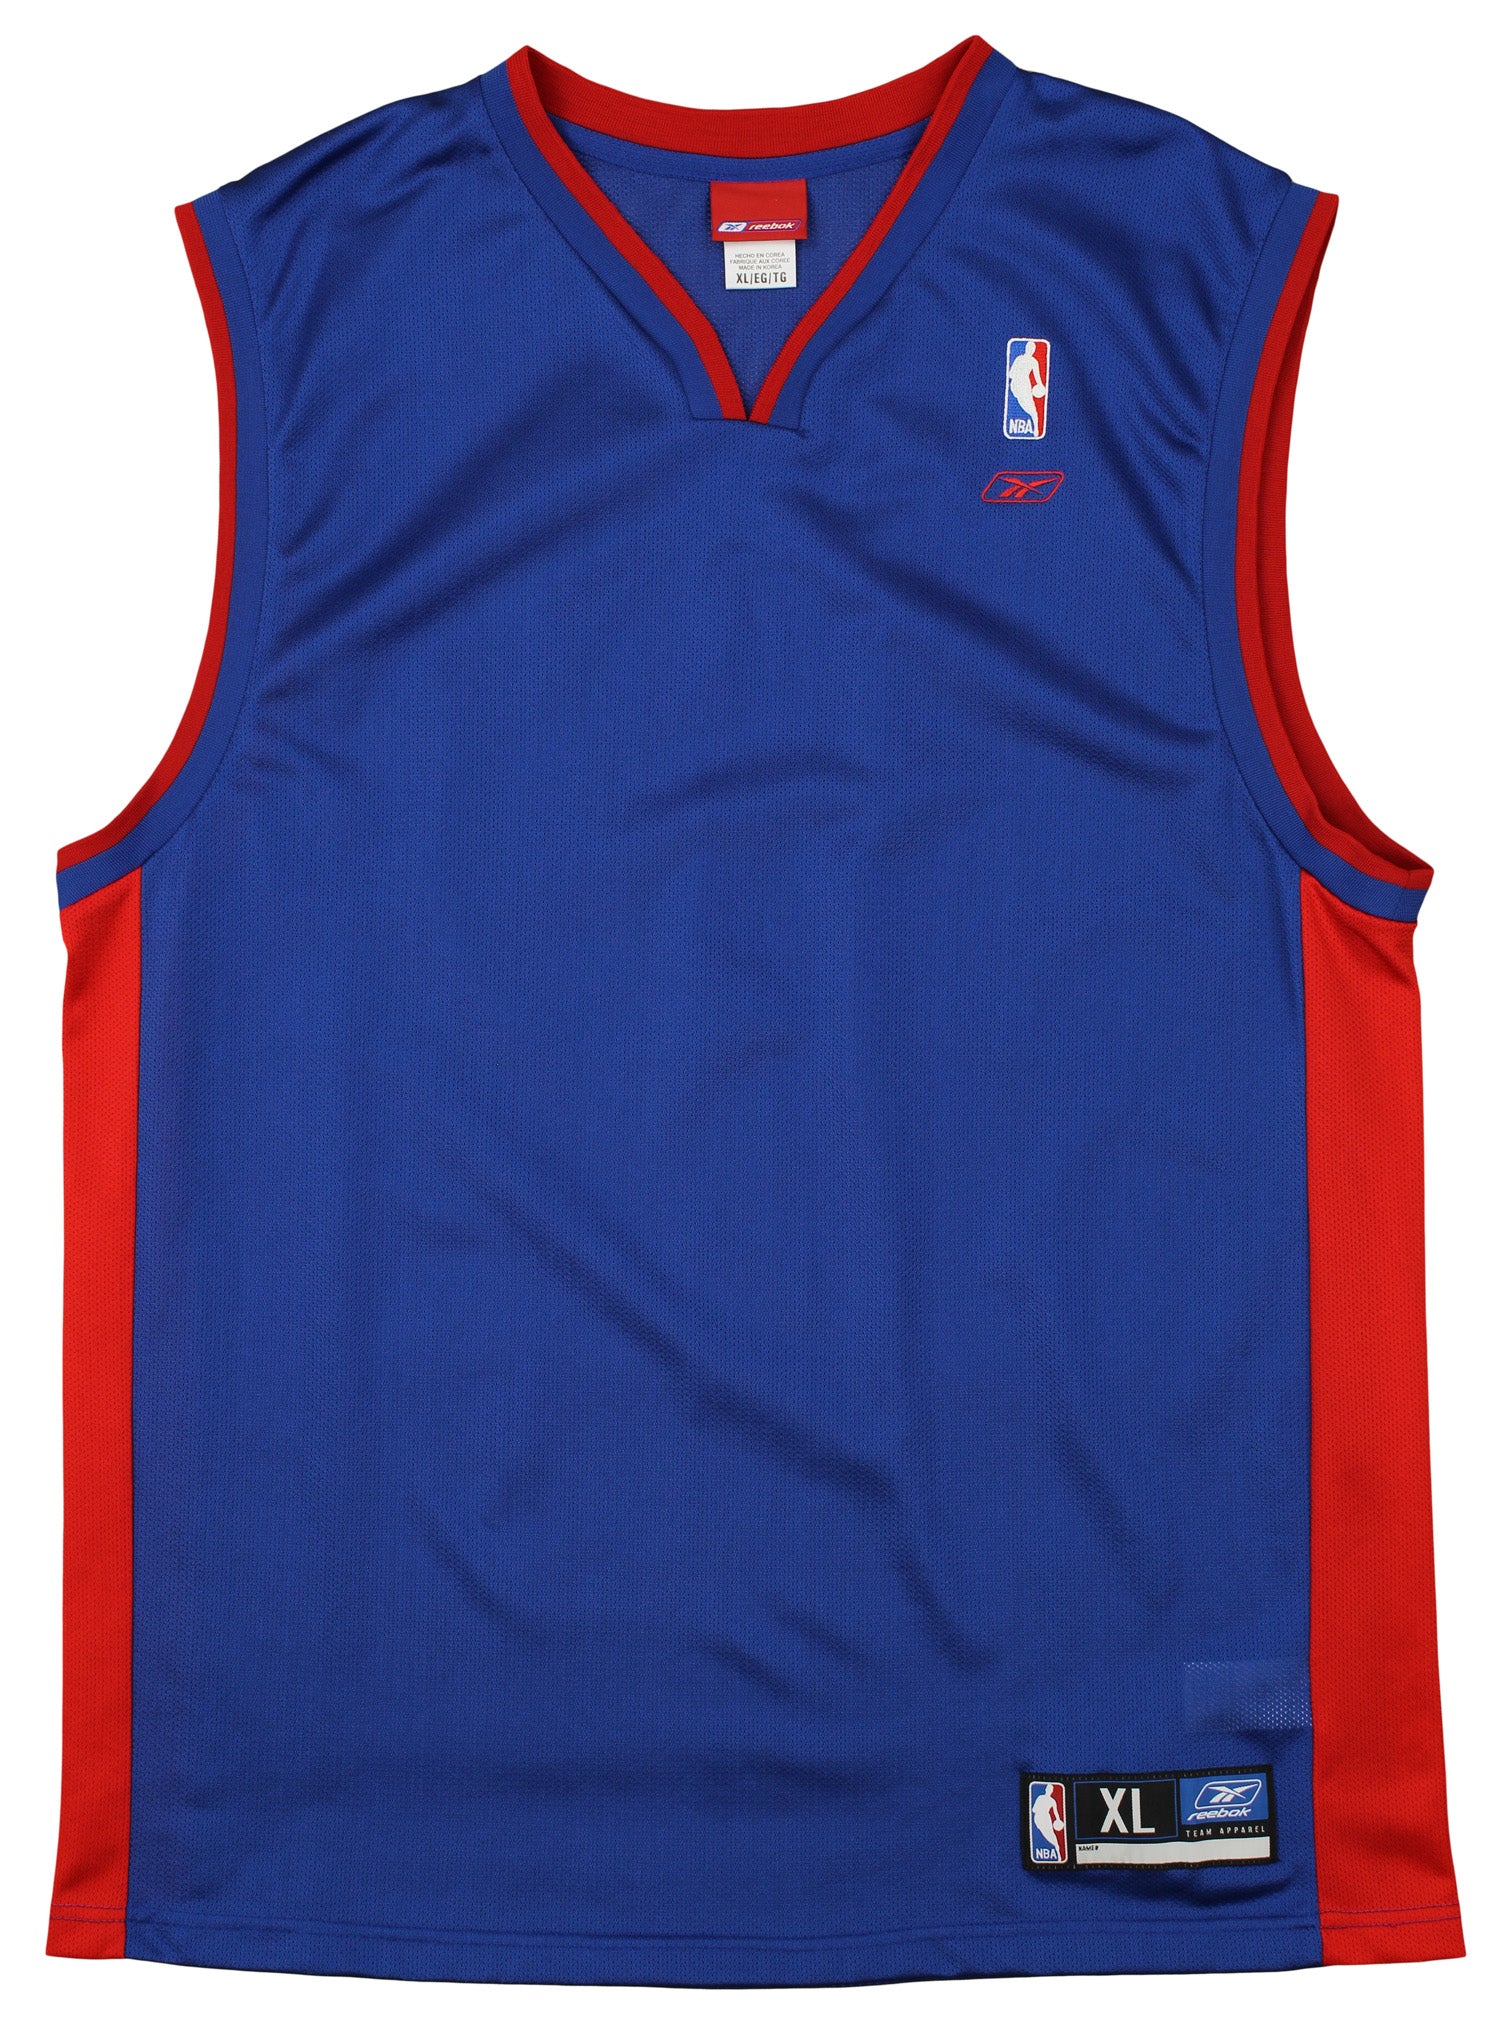 LA Clippers Vintage Jerseys, Clippers Retro Jersey